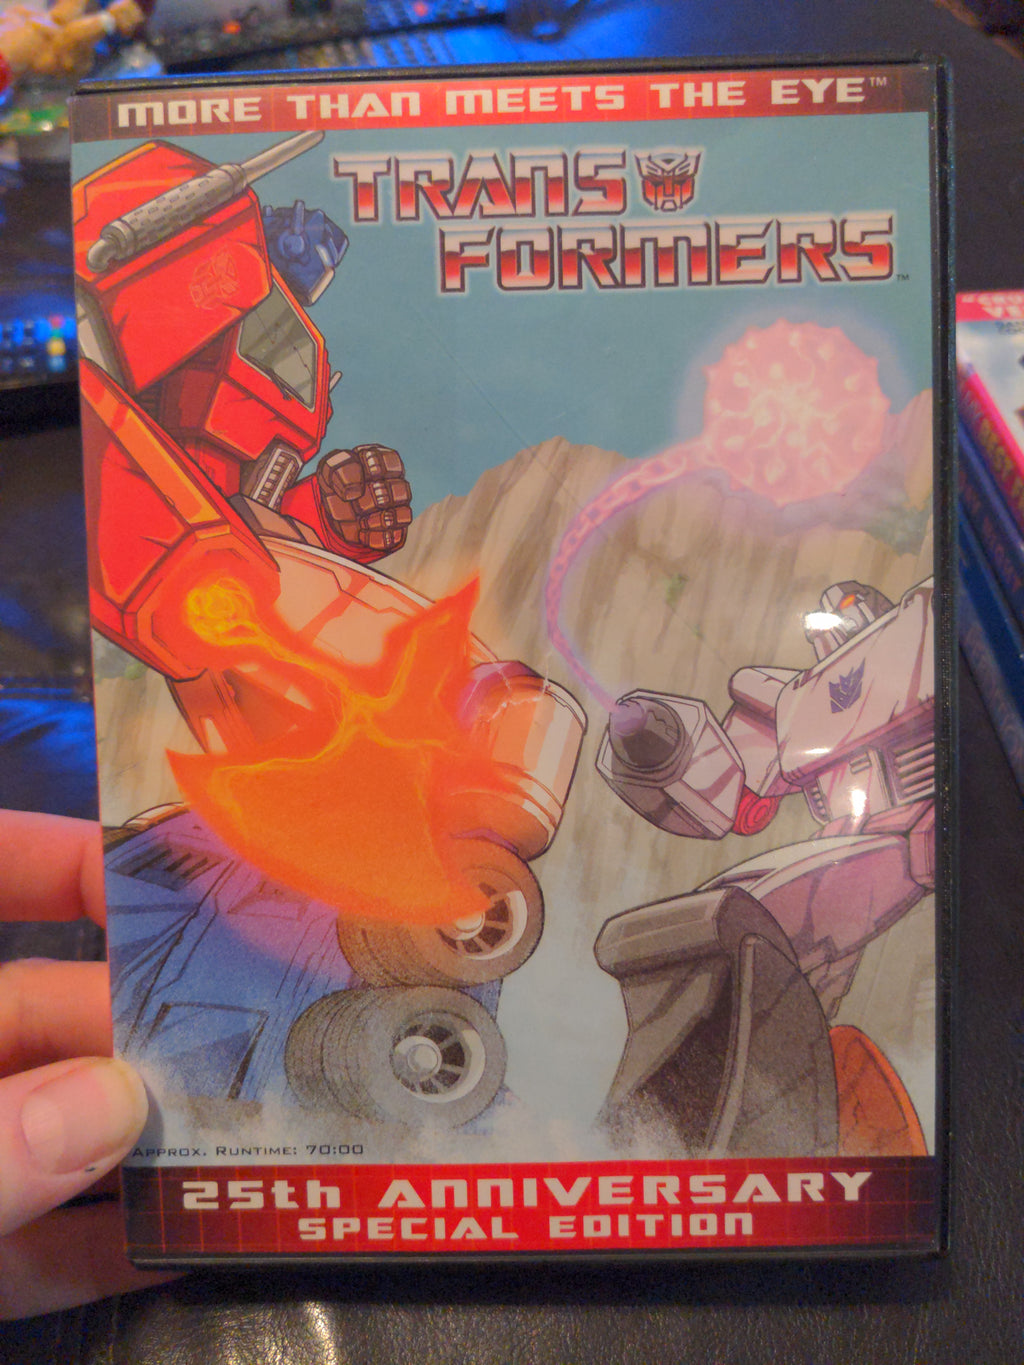 Transformers 25th Anniversary Special Edition DVD - 1st 3 Episodes of Series